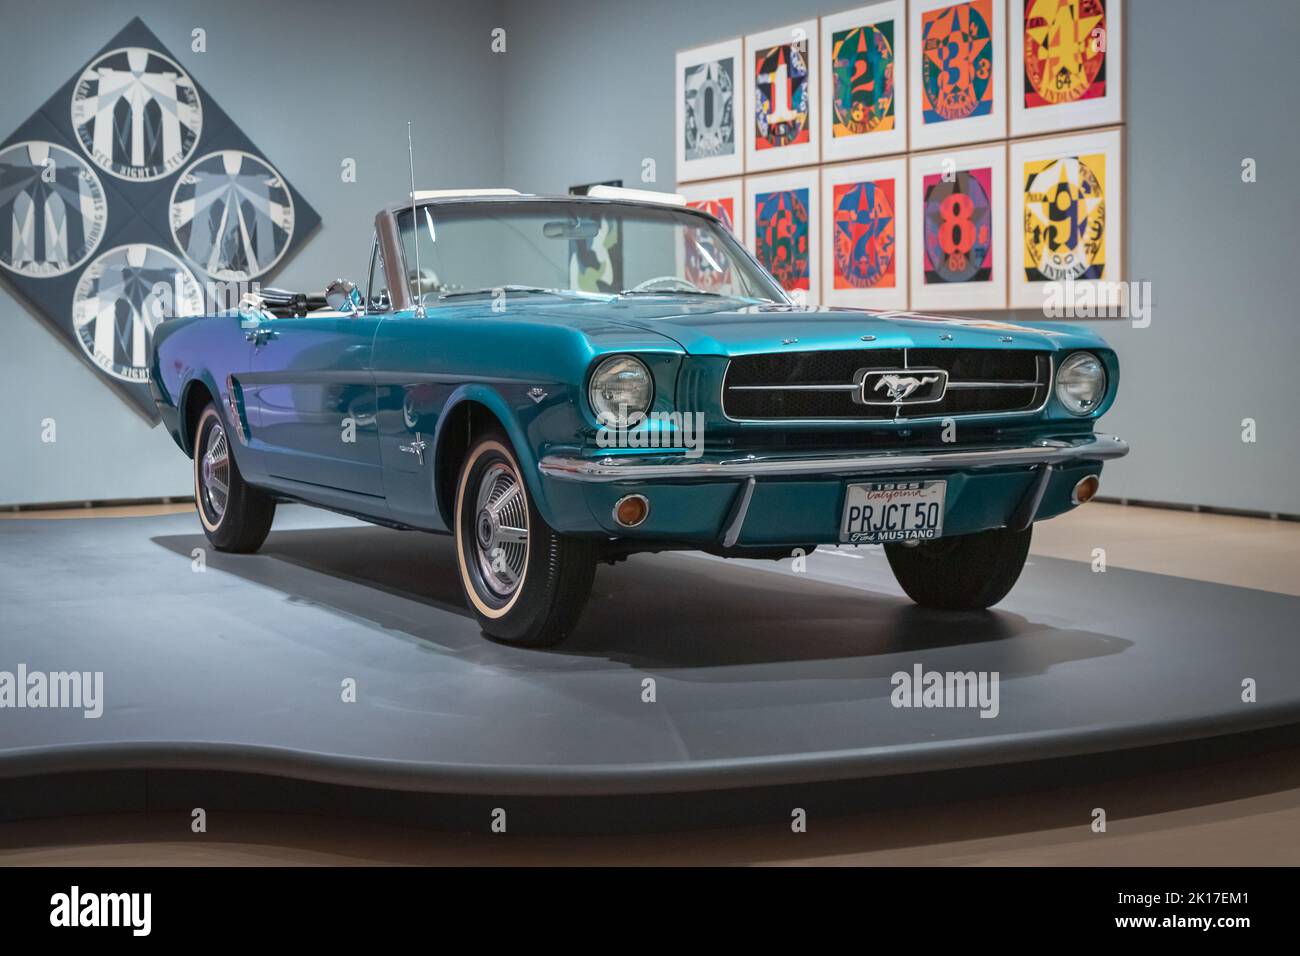 1965 Ford Mustang Project 50 (first generation convertible) Stock Photo